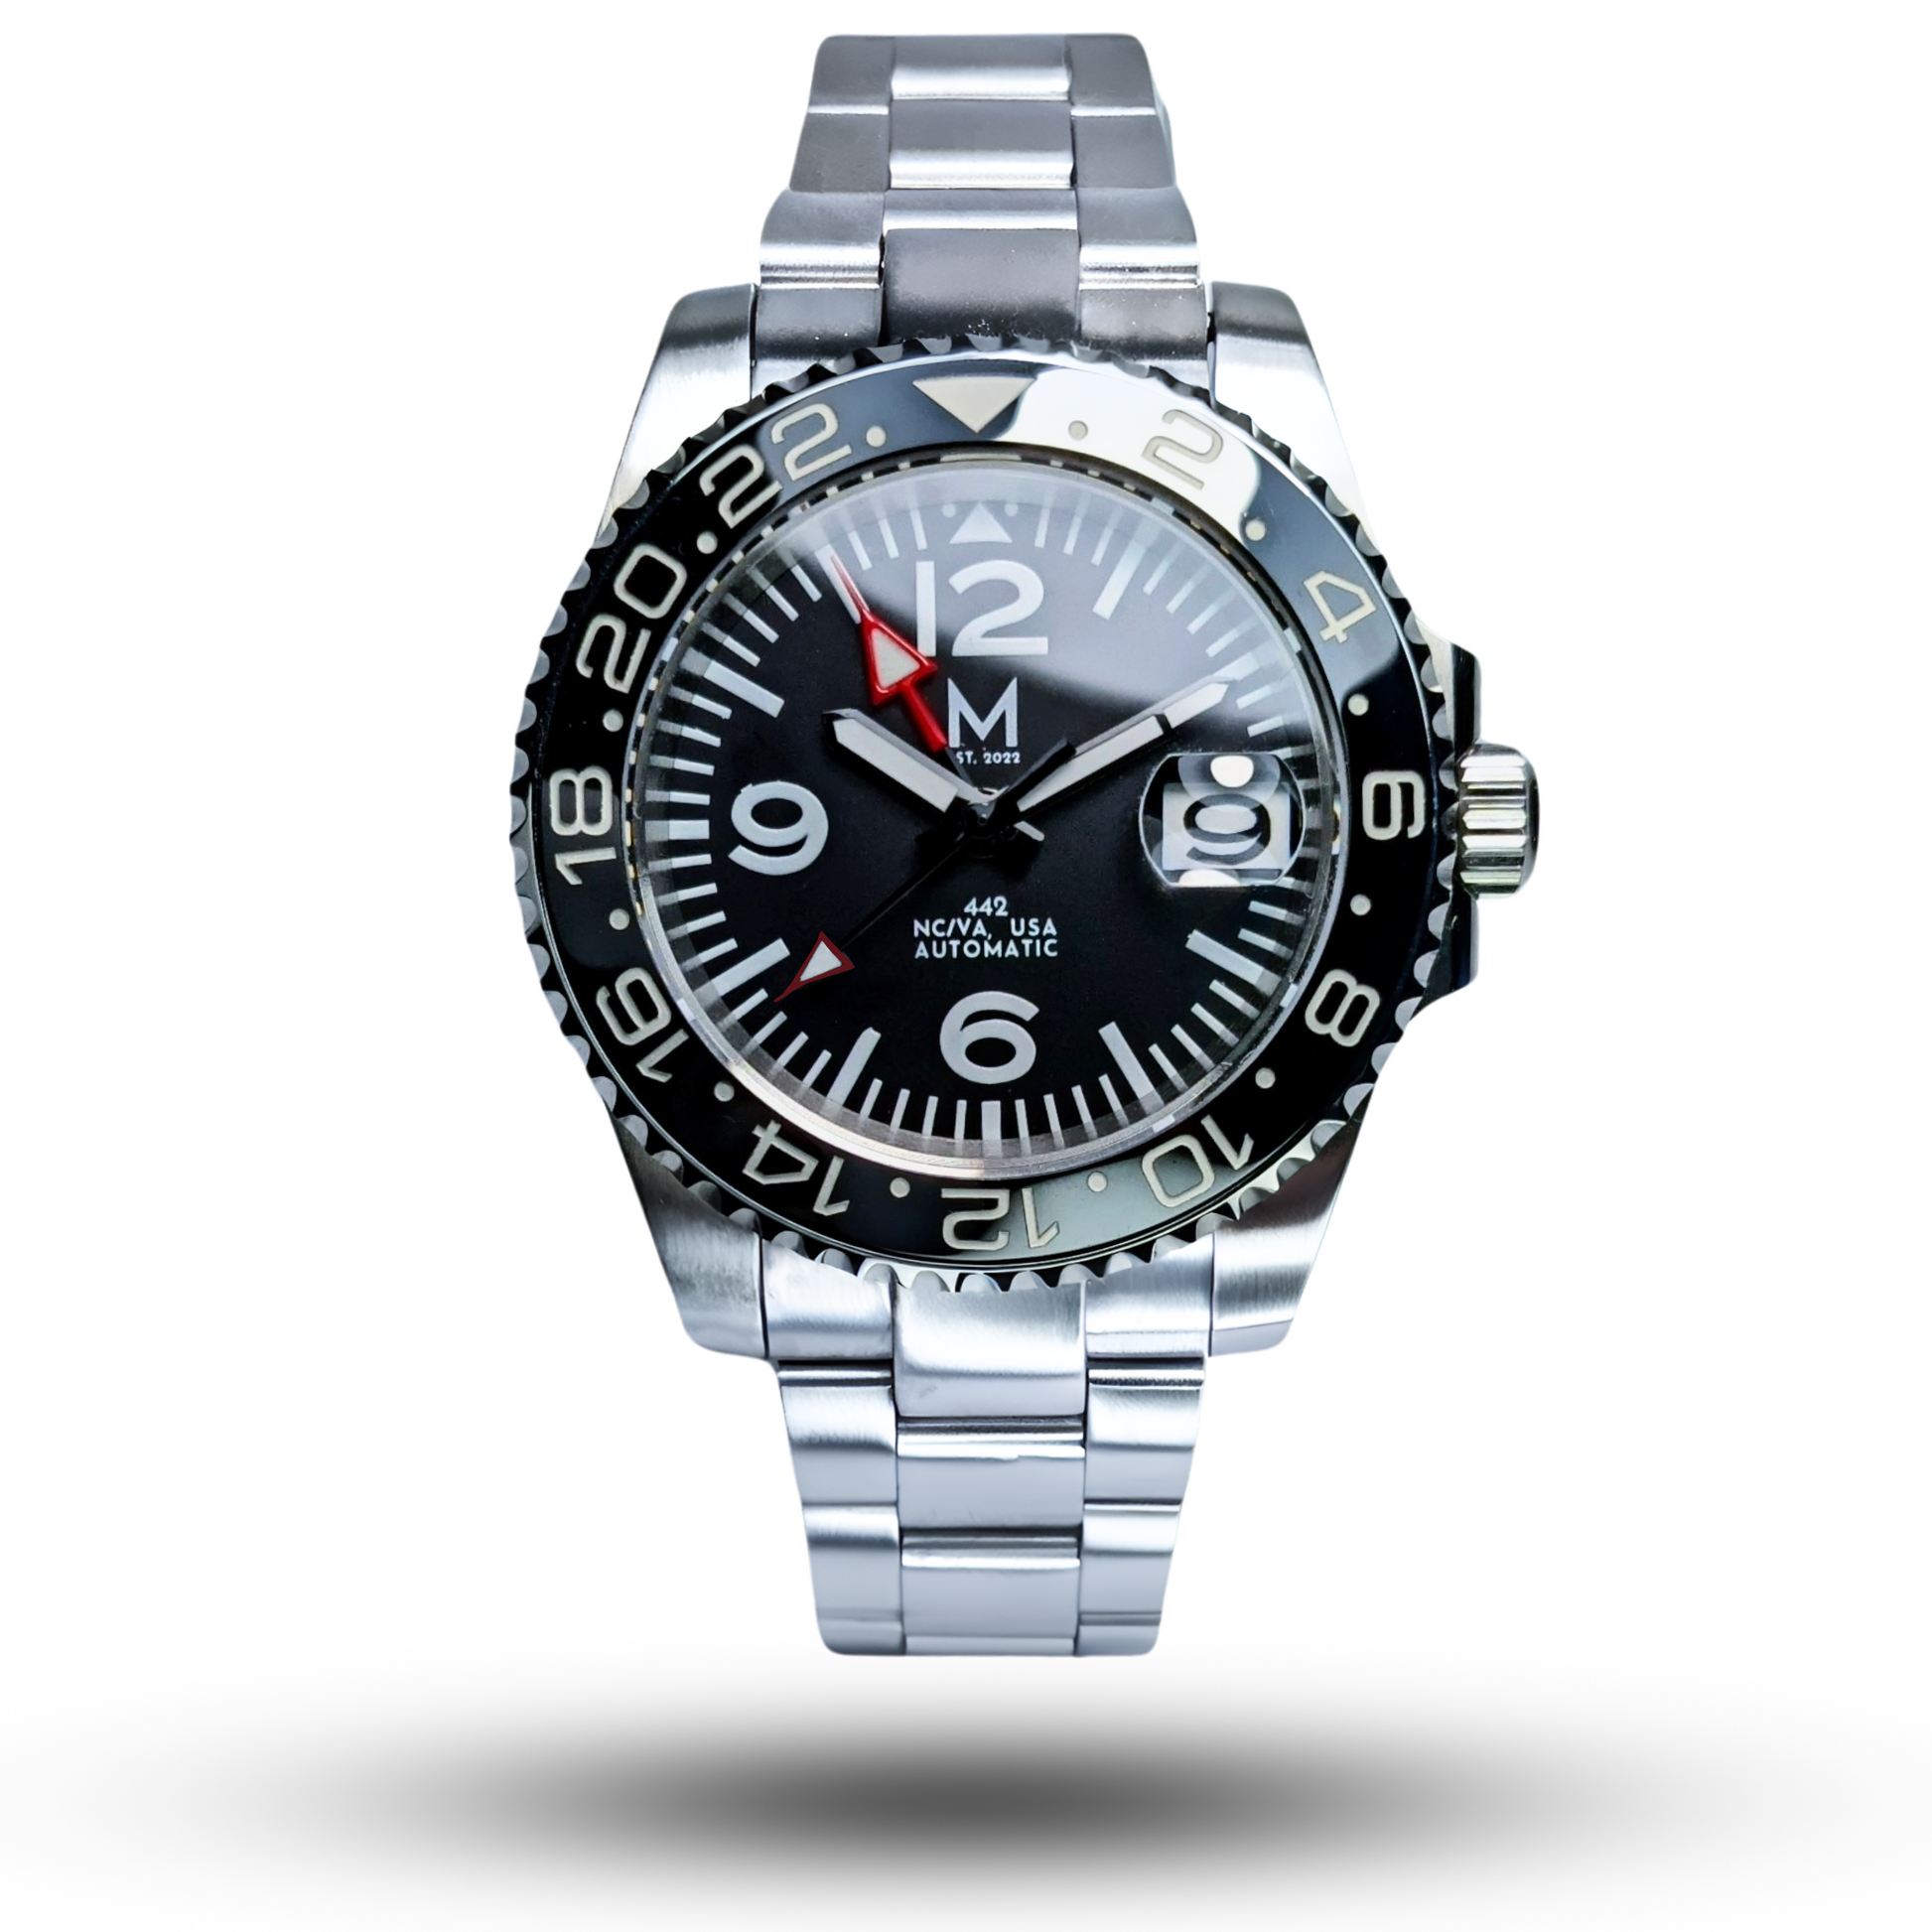 Stylish Men's GMT: Buy The 442 GMT Watch - Monterey Watch Co